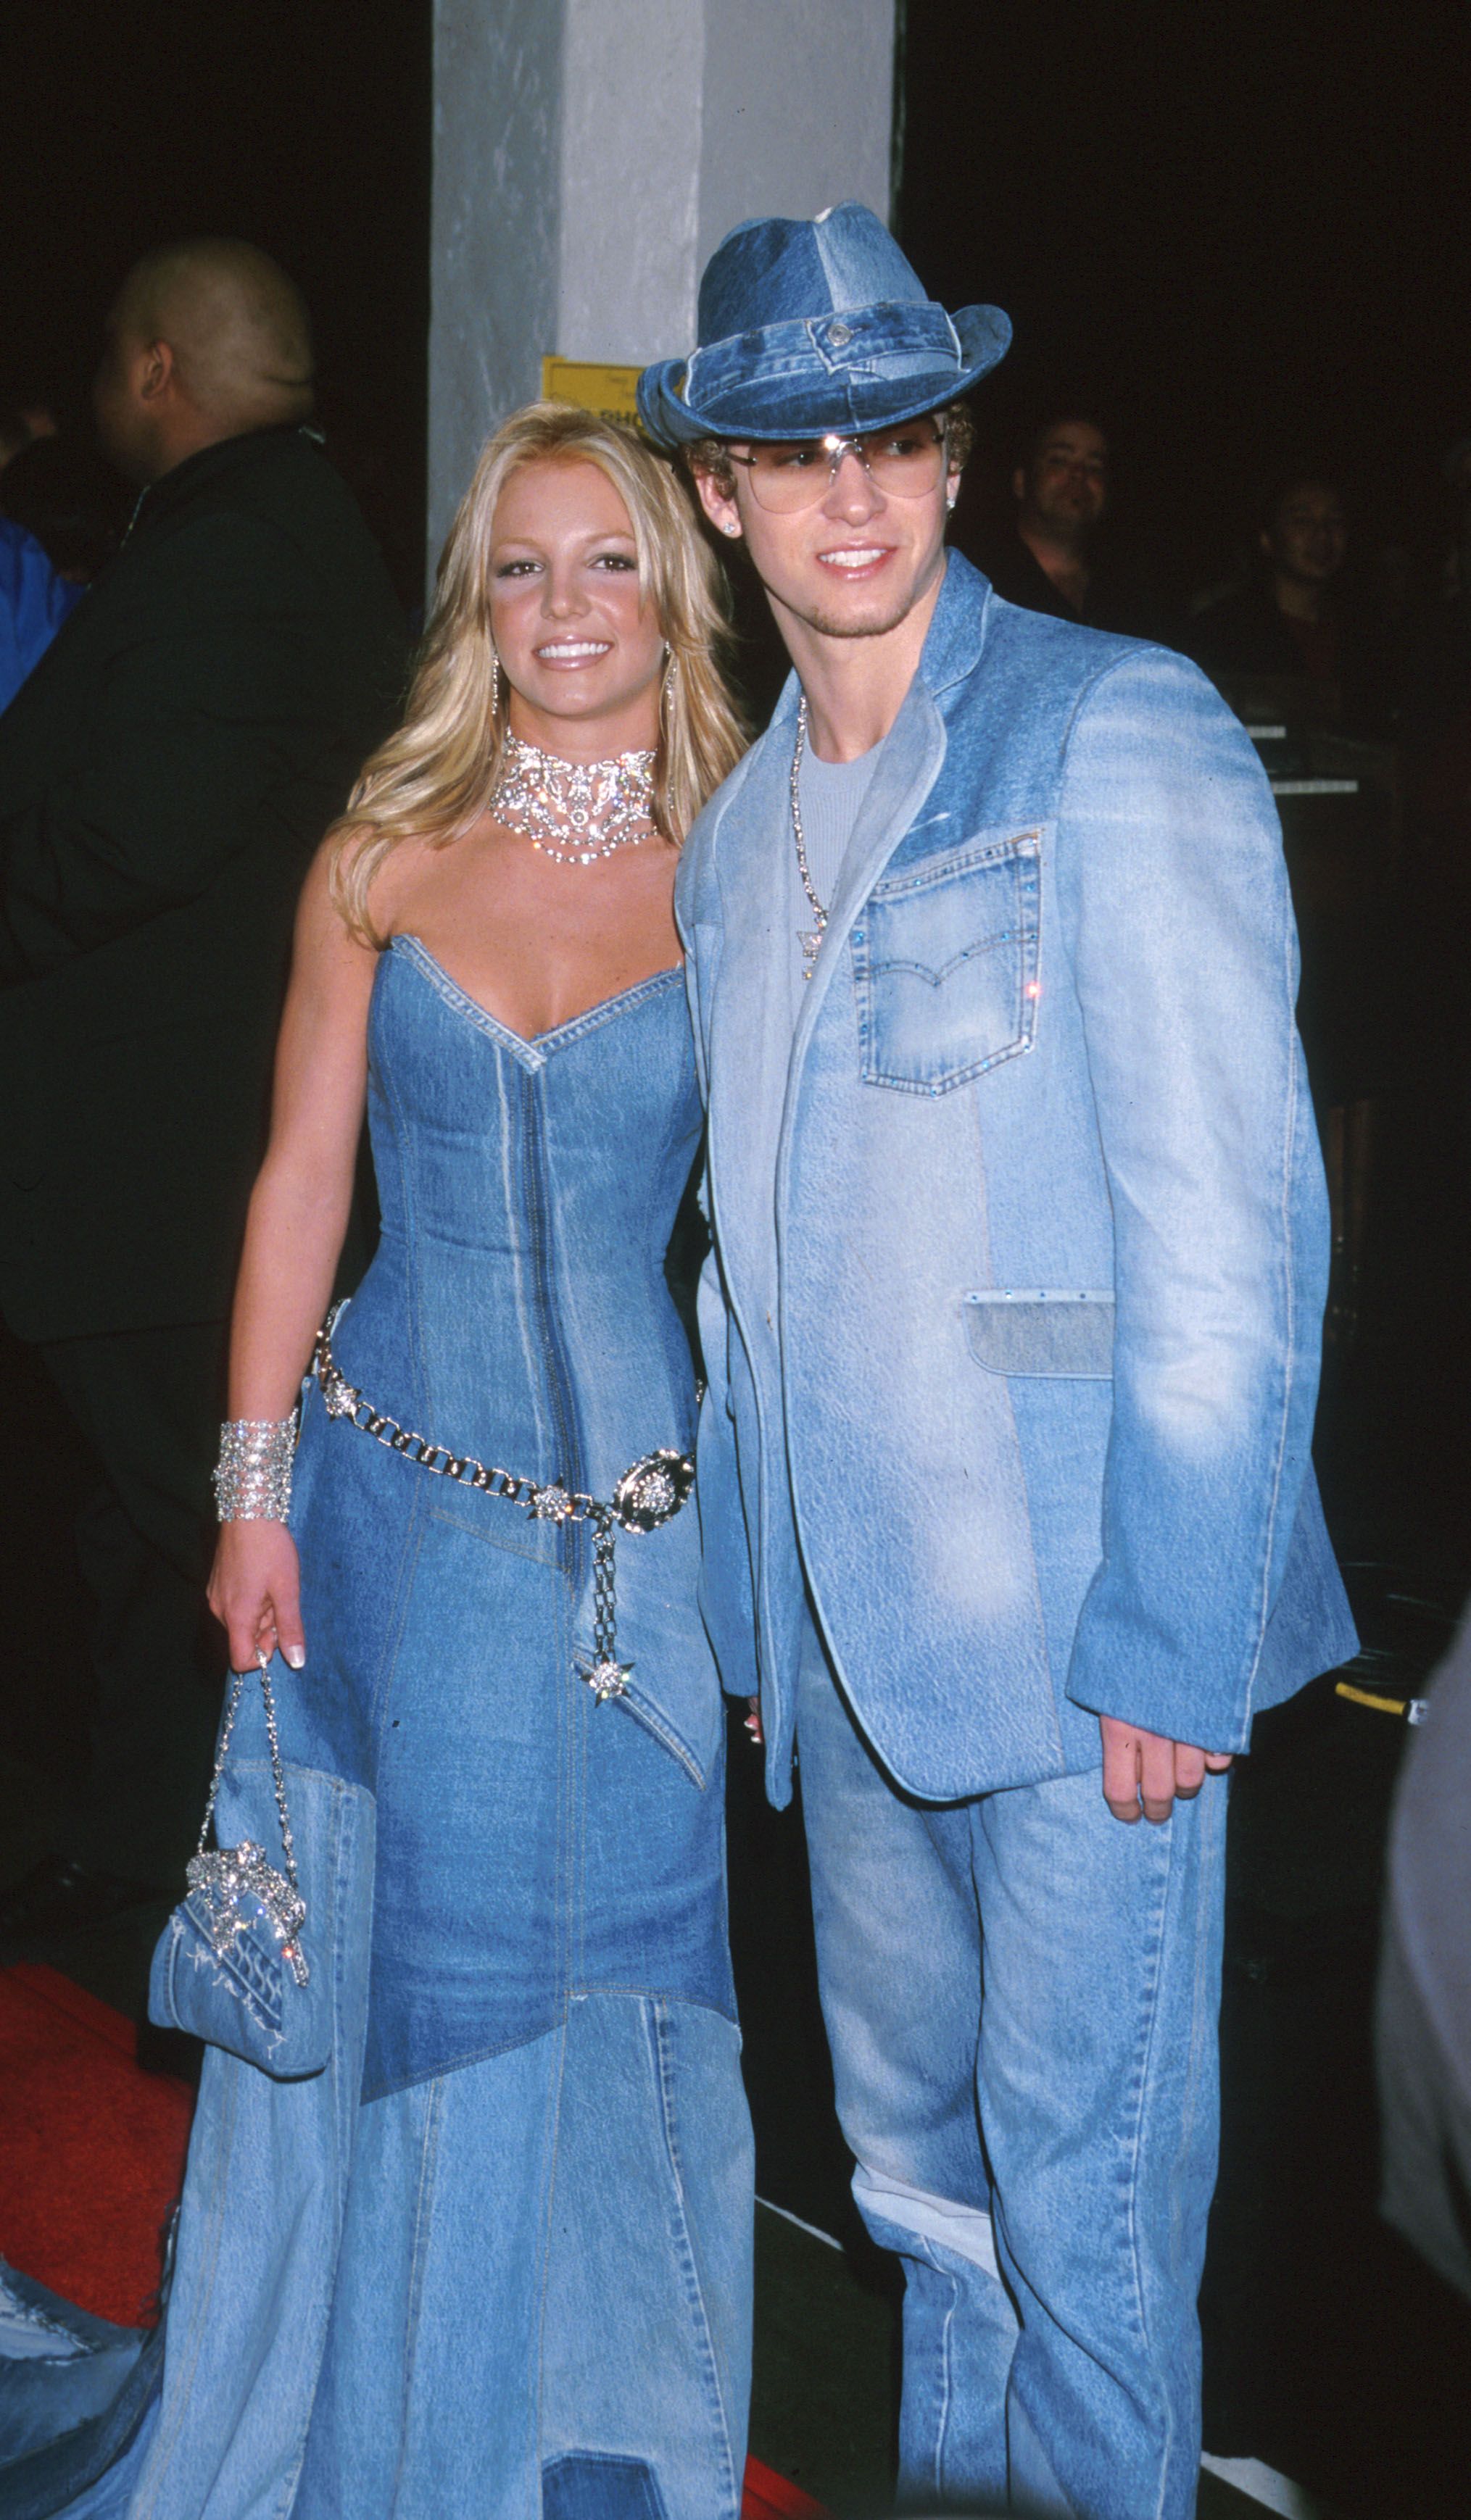 Justin Timberlake Wants the Internet to Forget About His Double-Denim Moment with Britney Spears